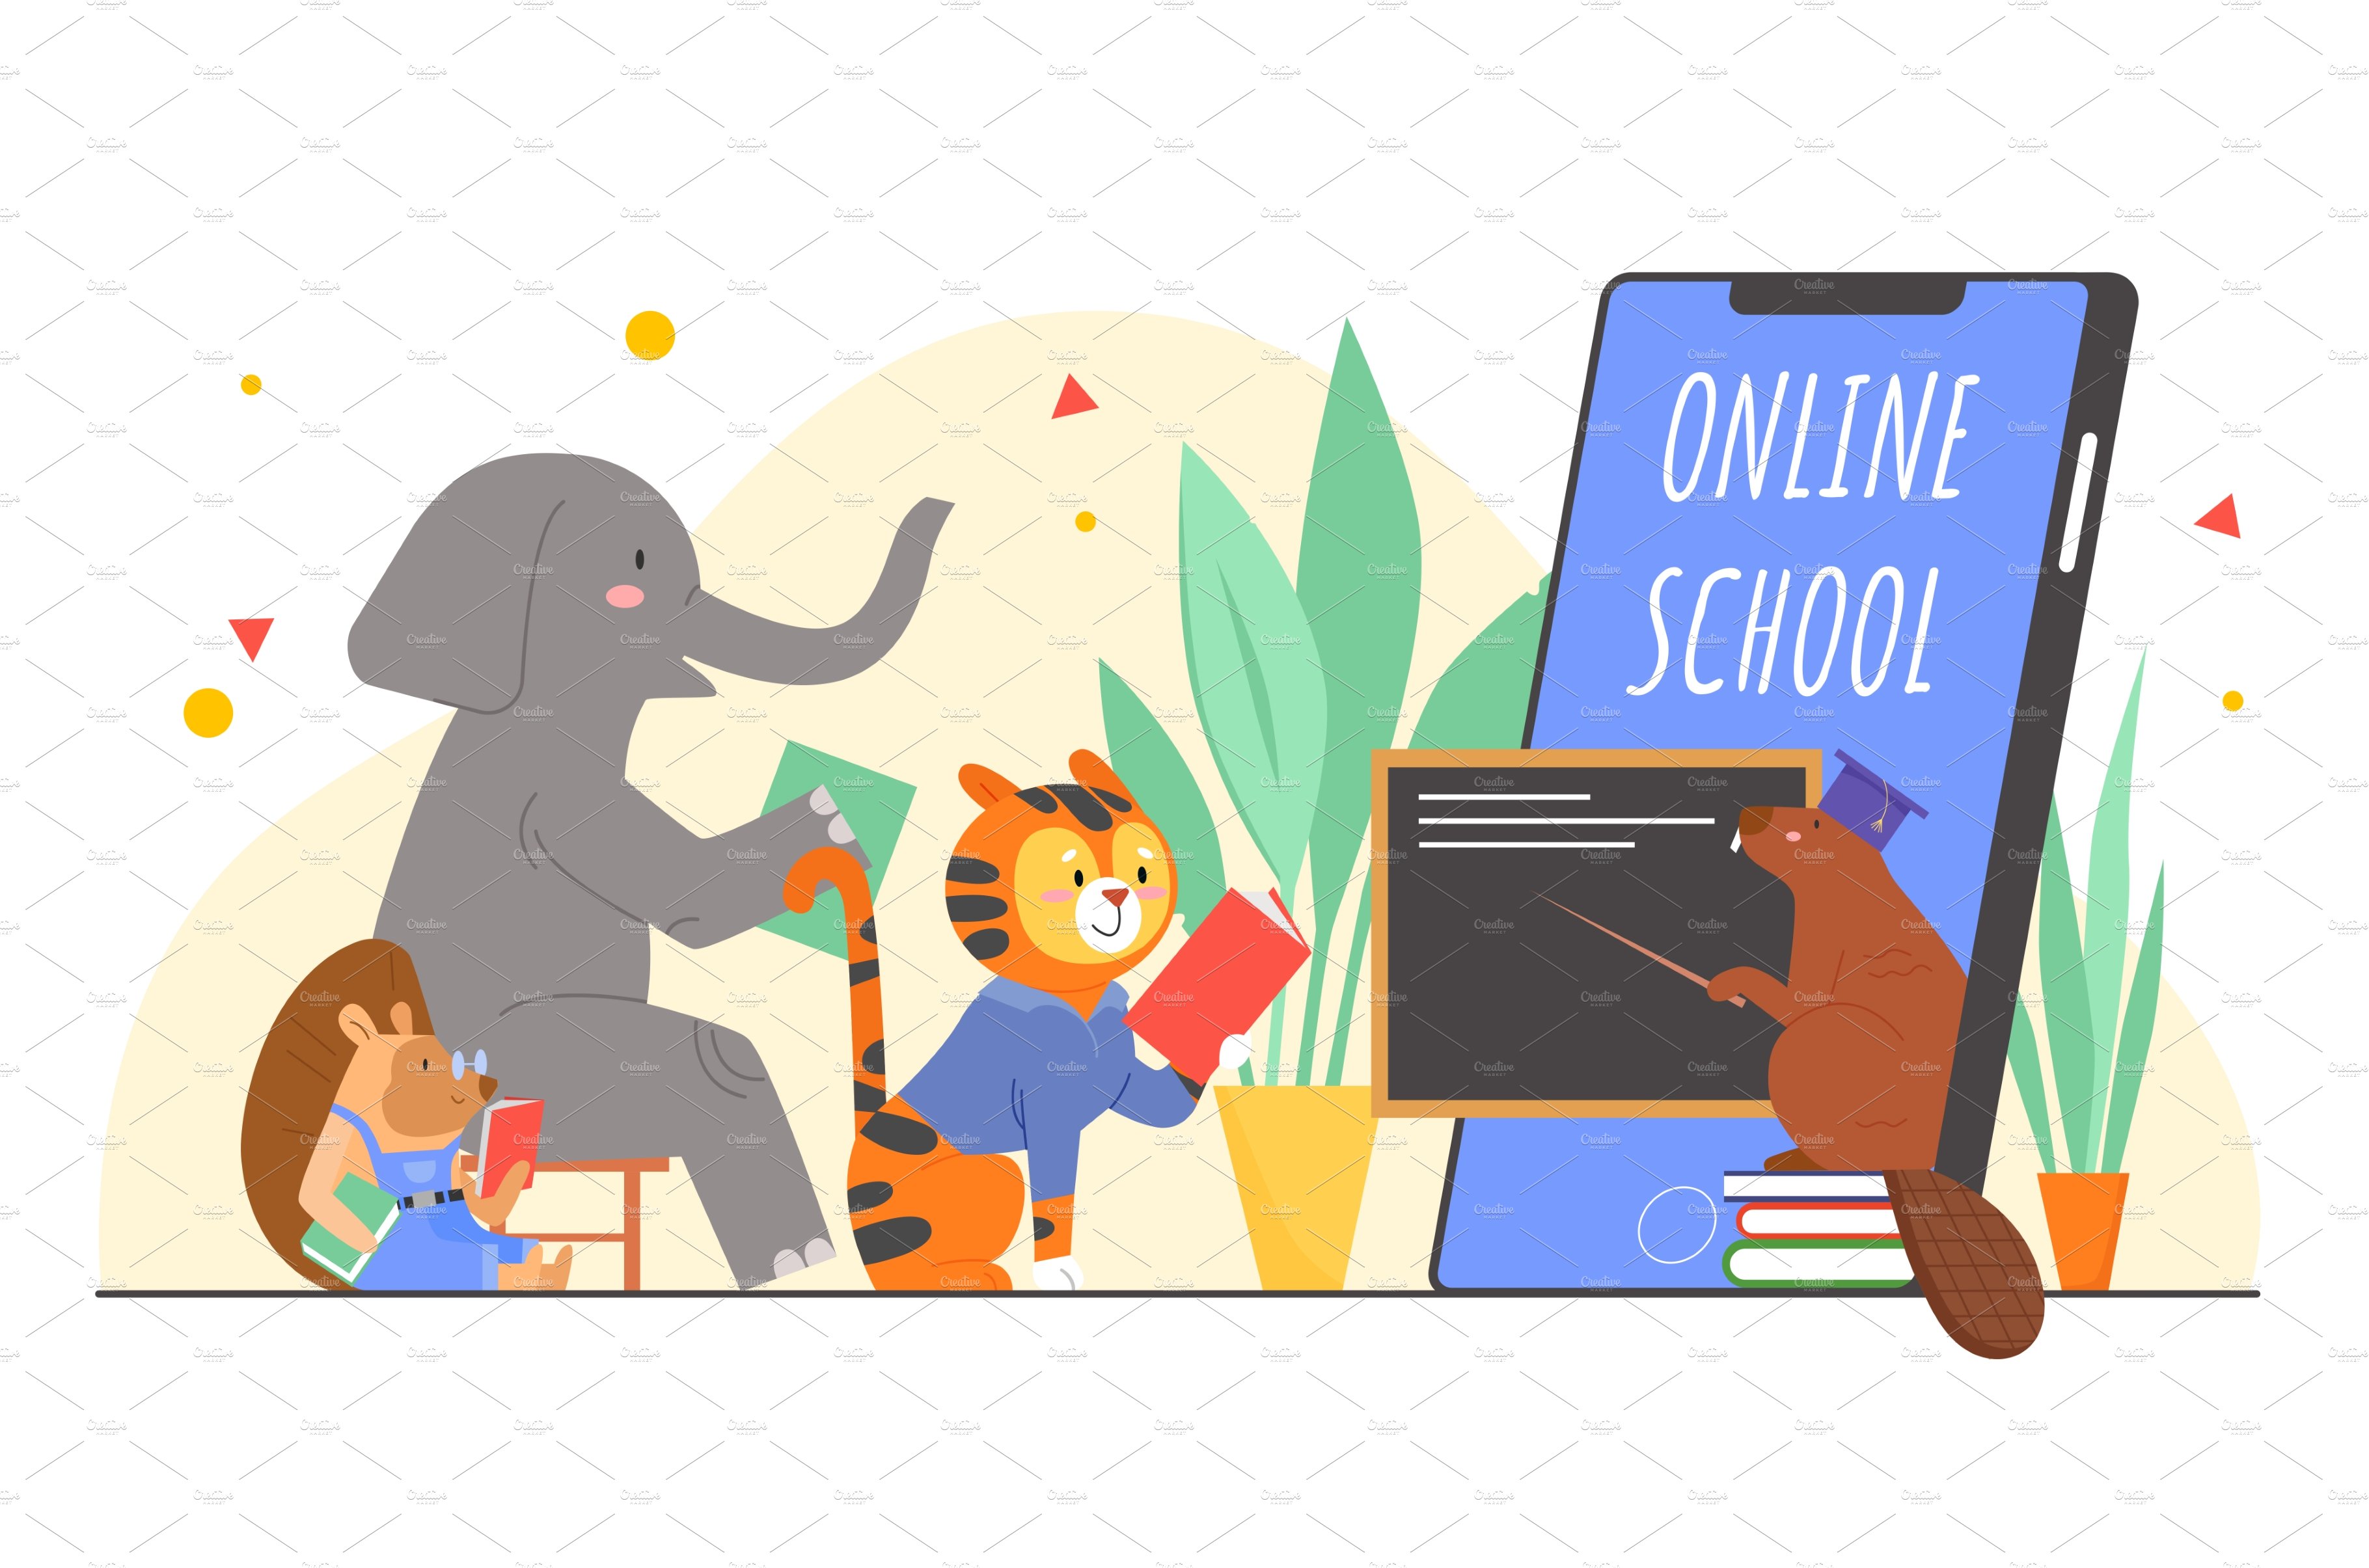 Animals in online school education cover image.